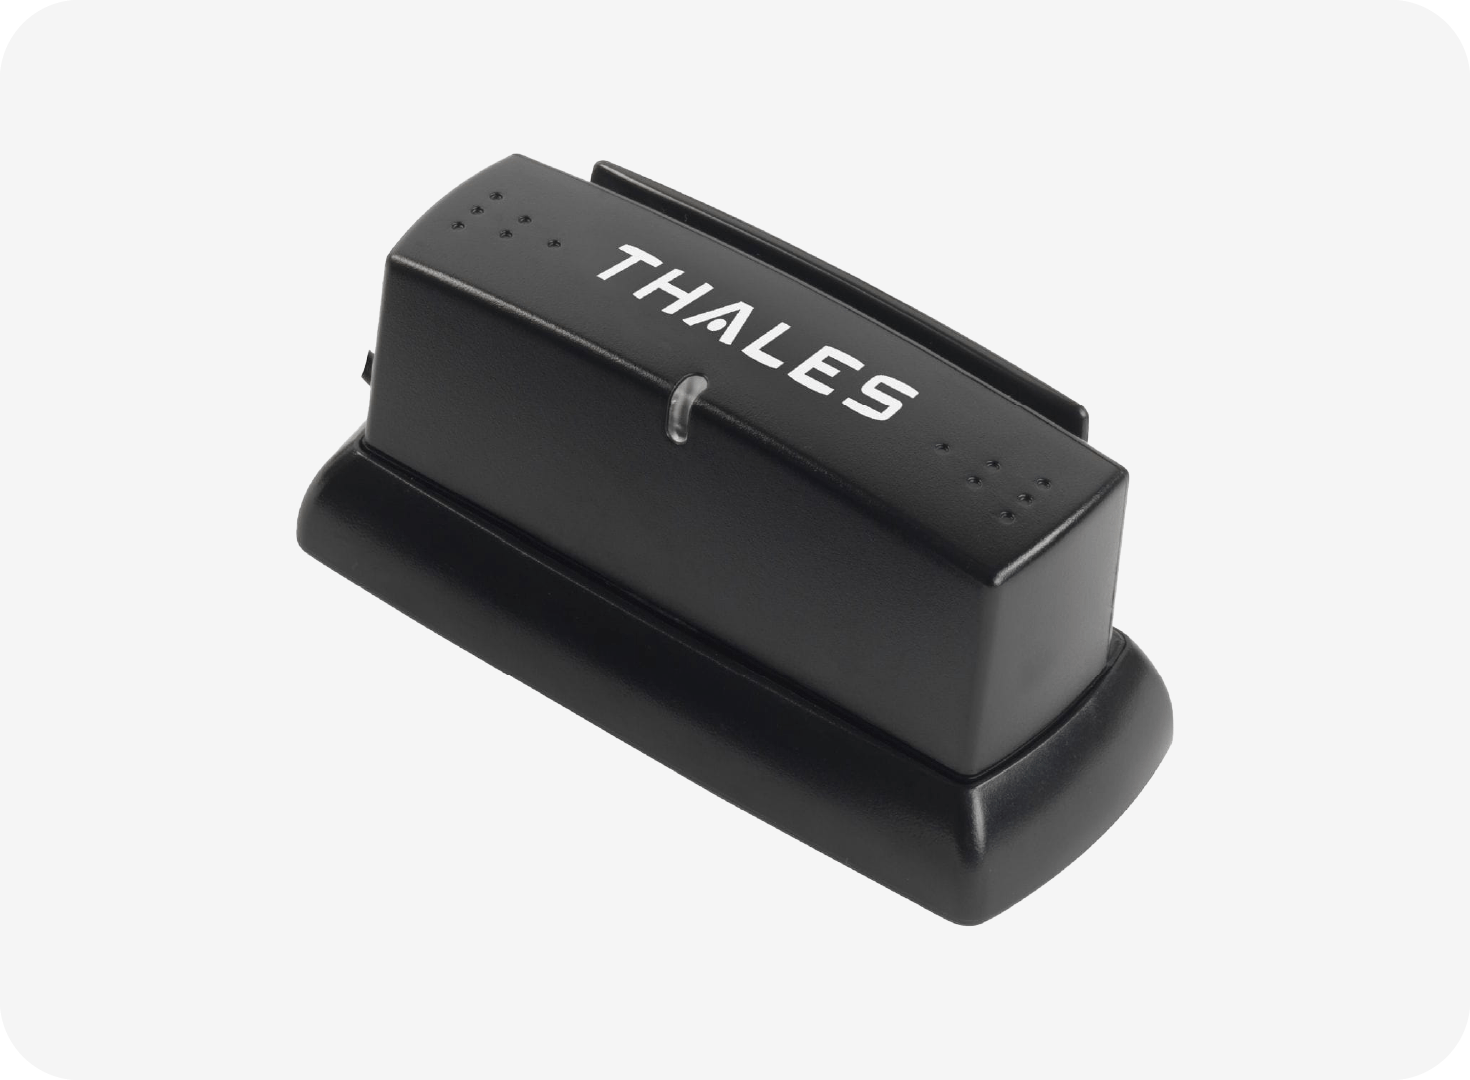 Shop Now - Thales AT9000 Full Page ID & Passport Reader with RFID, CN 